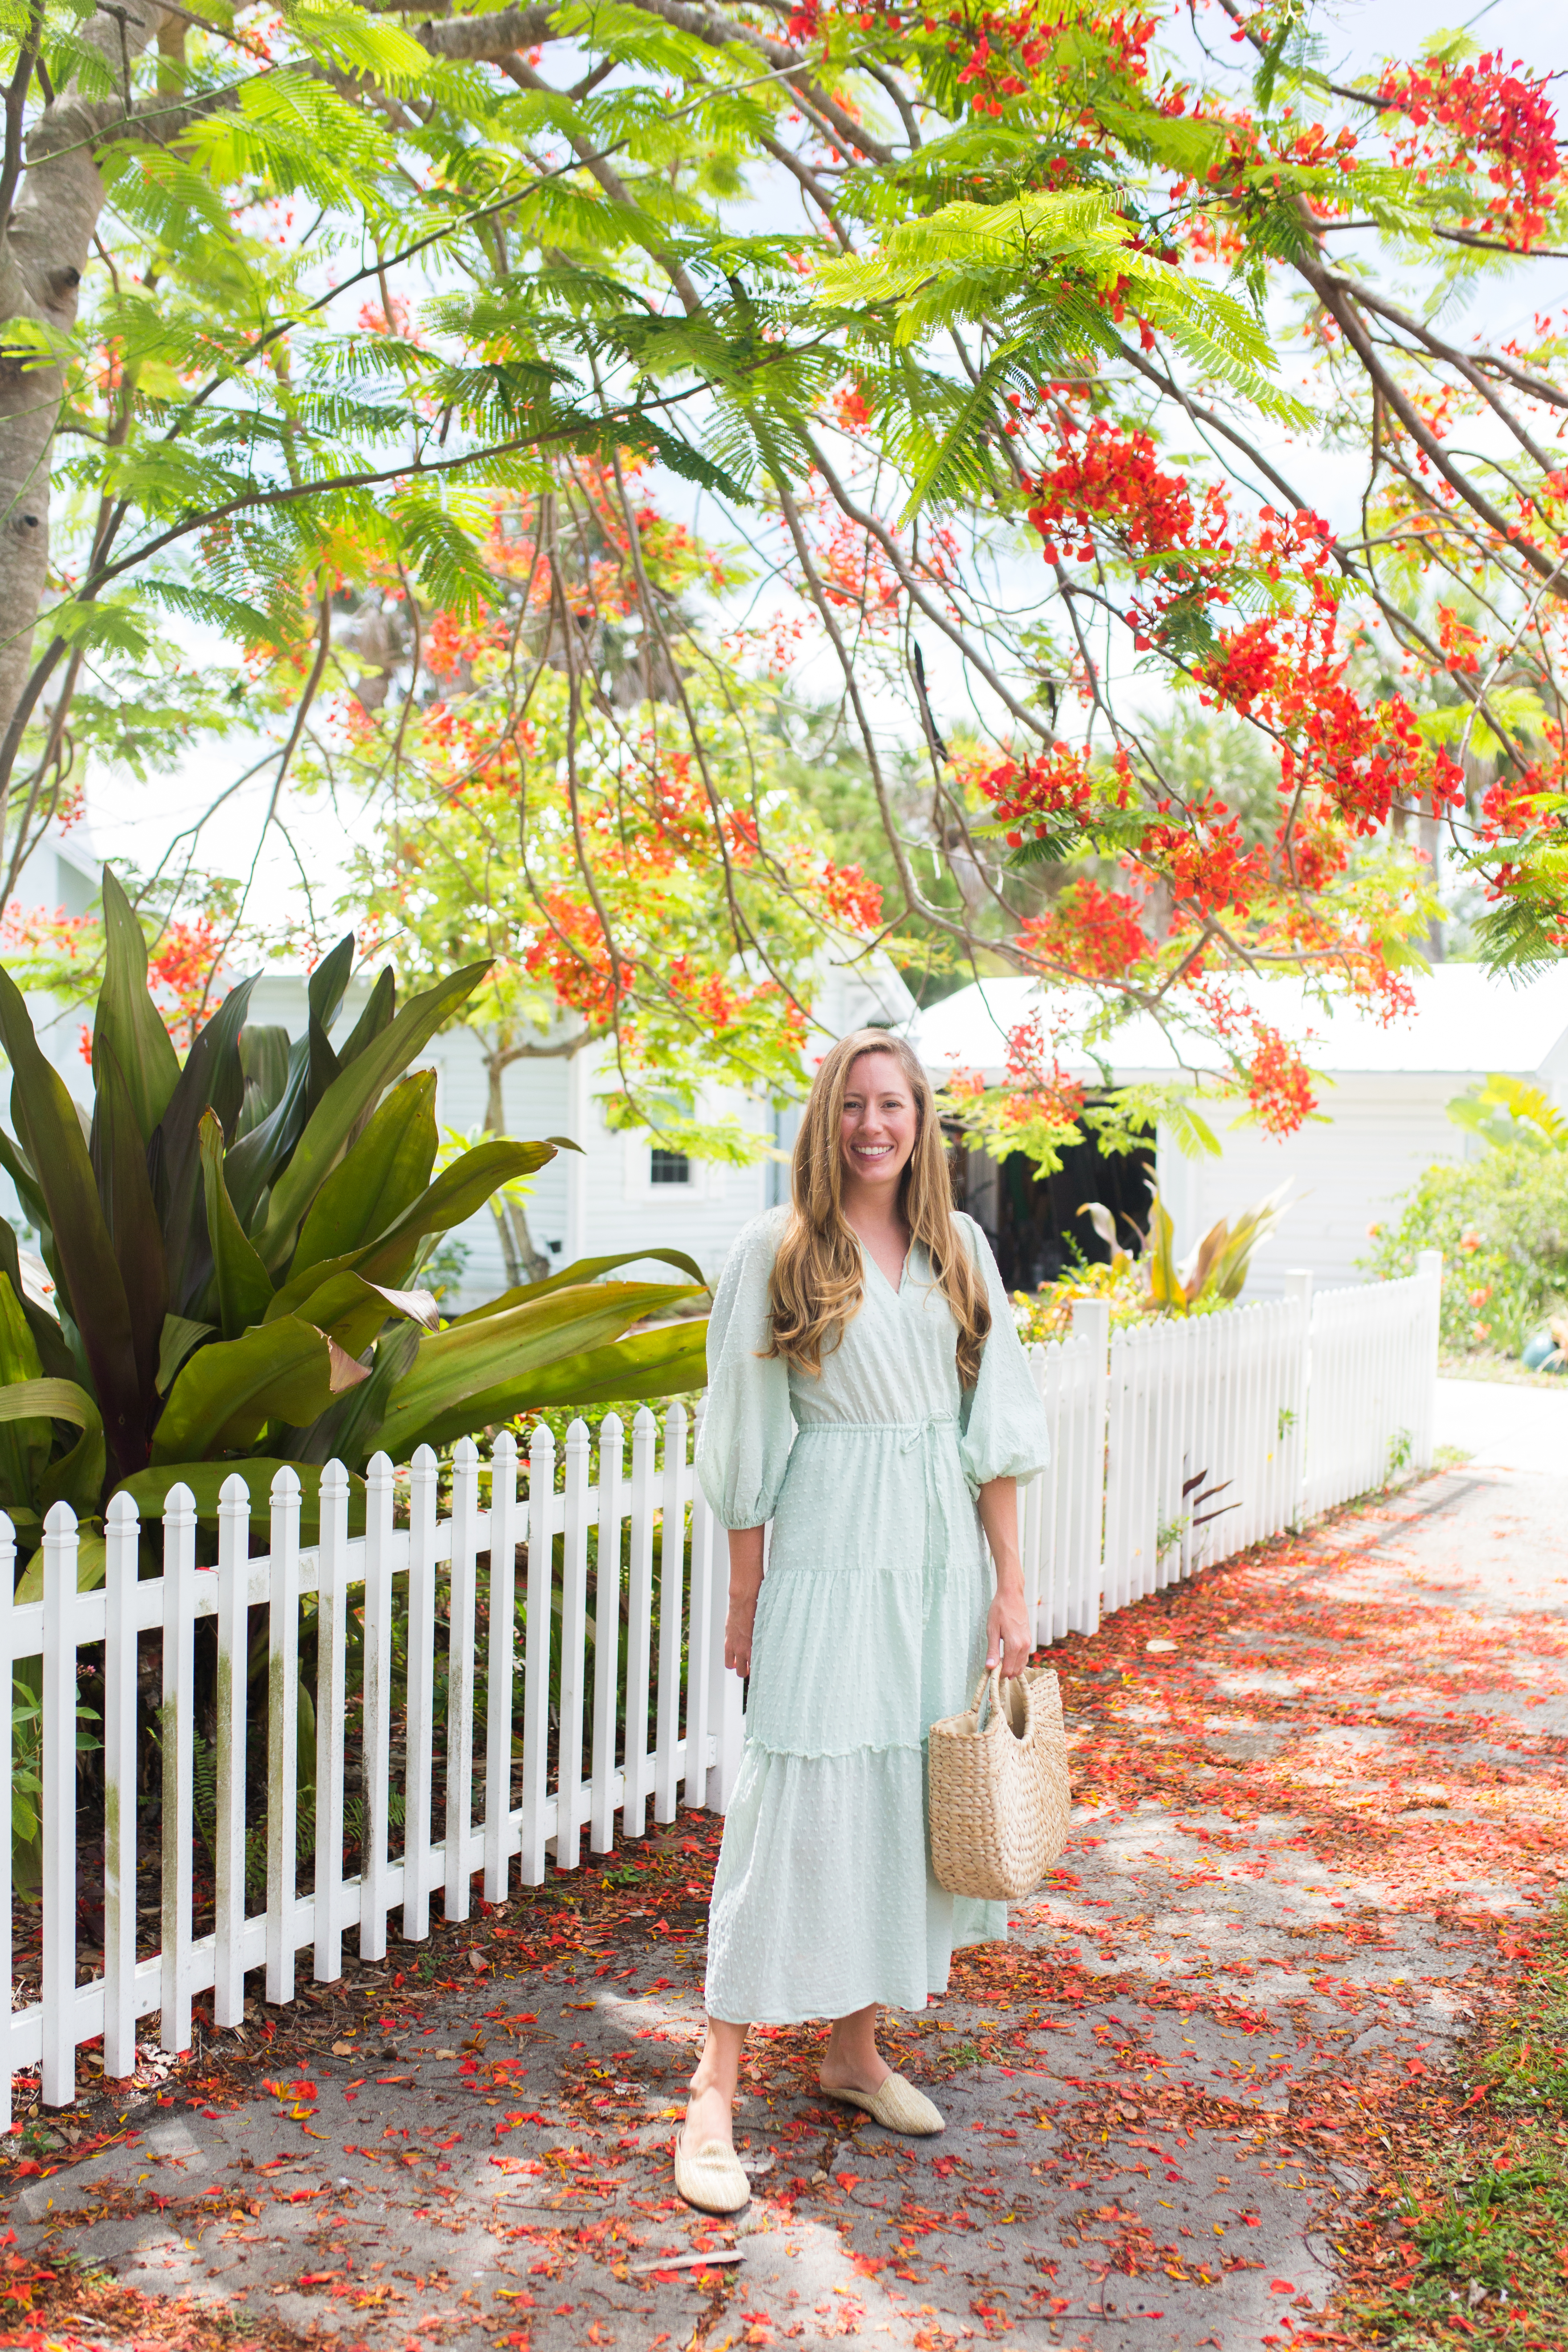 The Perfect Transition Dress from Spring to Summer / How to Style a Maxi Dress for Spring / Warm Weather Outfits / Casual Maxi Dress / Spring Outfit Inspiration / Summer Maxi Dress / Blouse Sleeves Dress - Sunshine Style, A Florida Based Style and Travel Blog